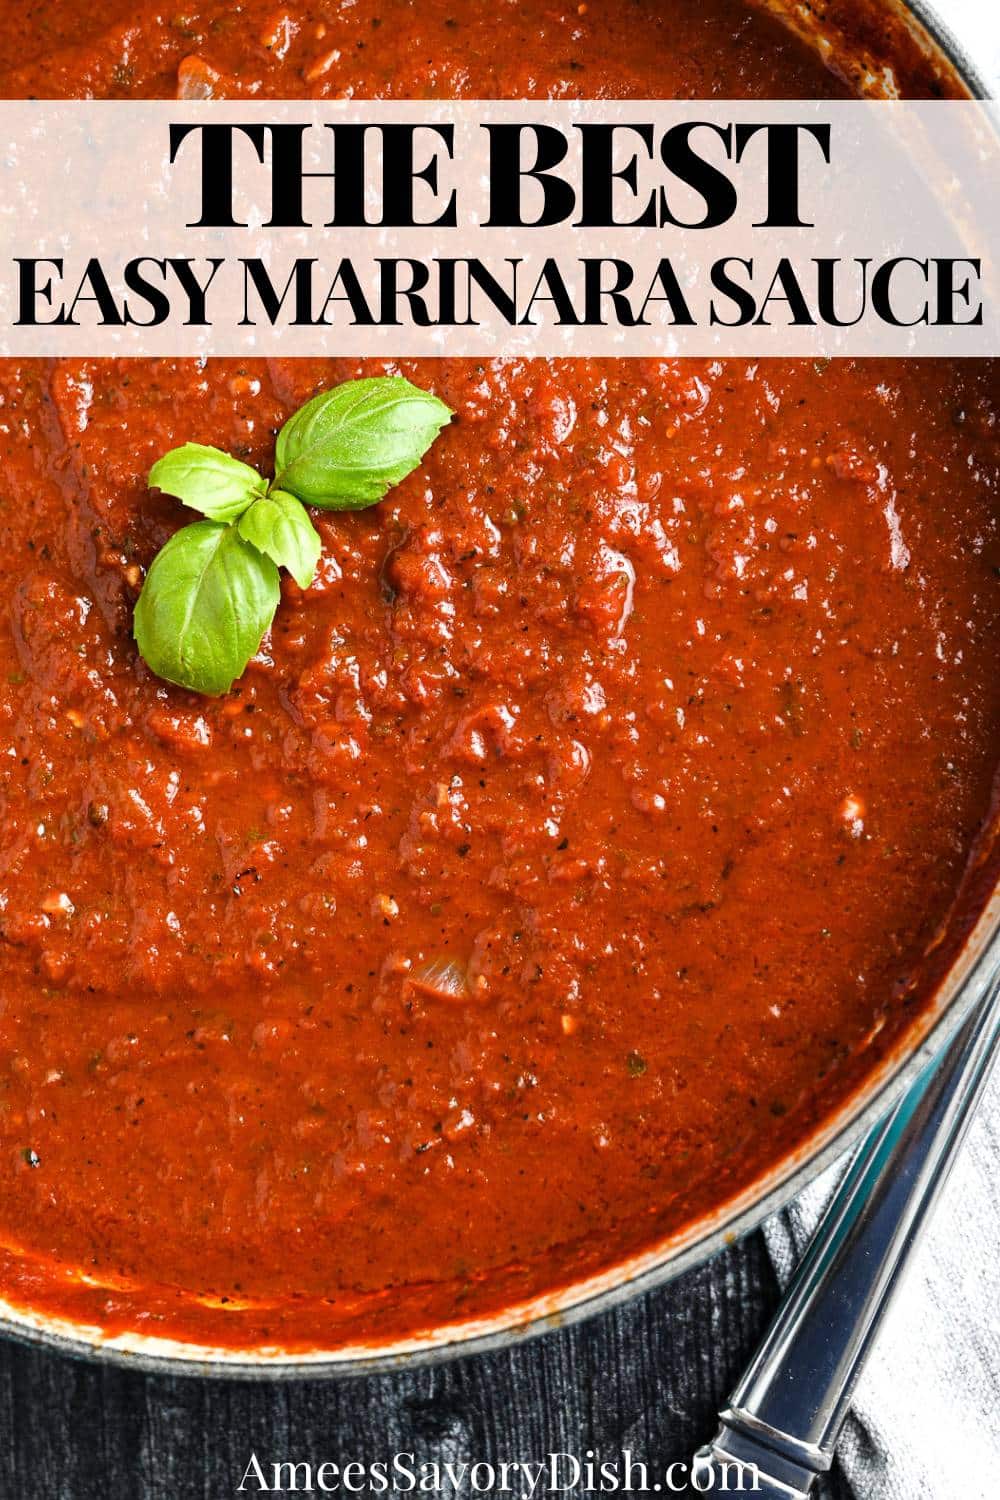 This homemade Hearty Marinara Sauce transforms San Marzano tomatoes and only the best Italian ingredients into a thick, robust red sauce in under 40 minutes. via @Ameessavorydish